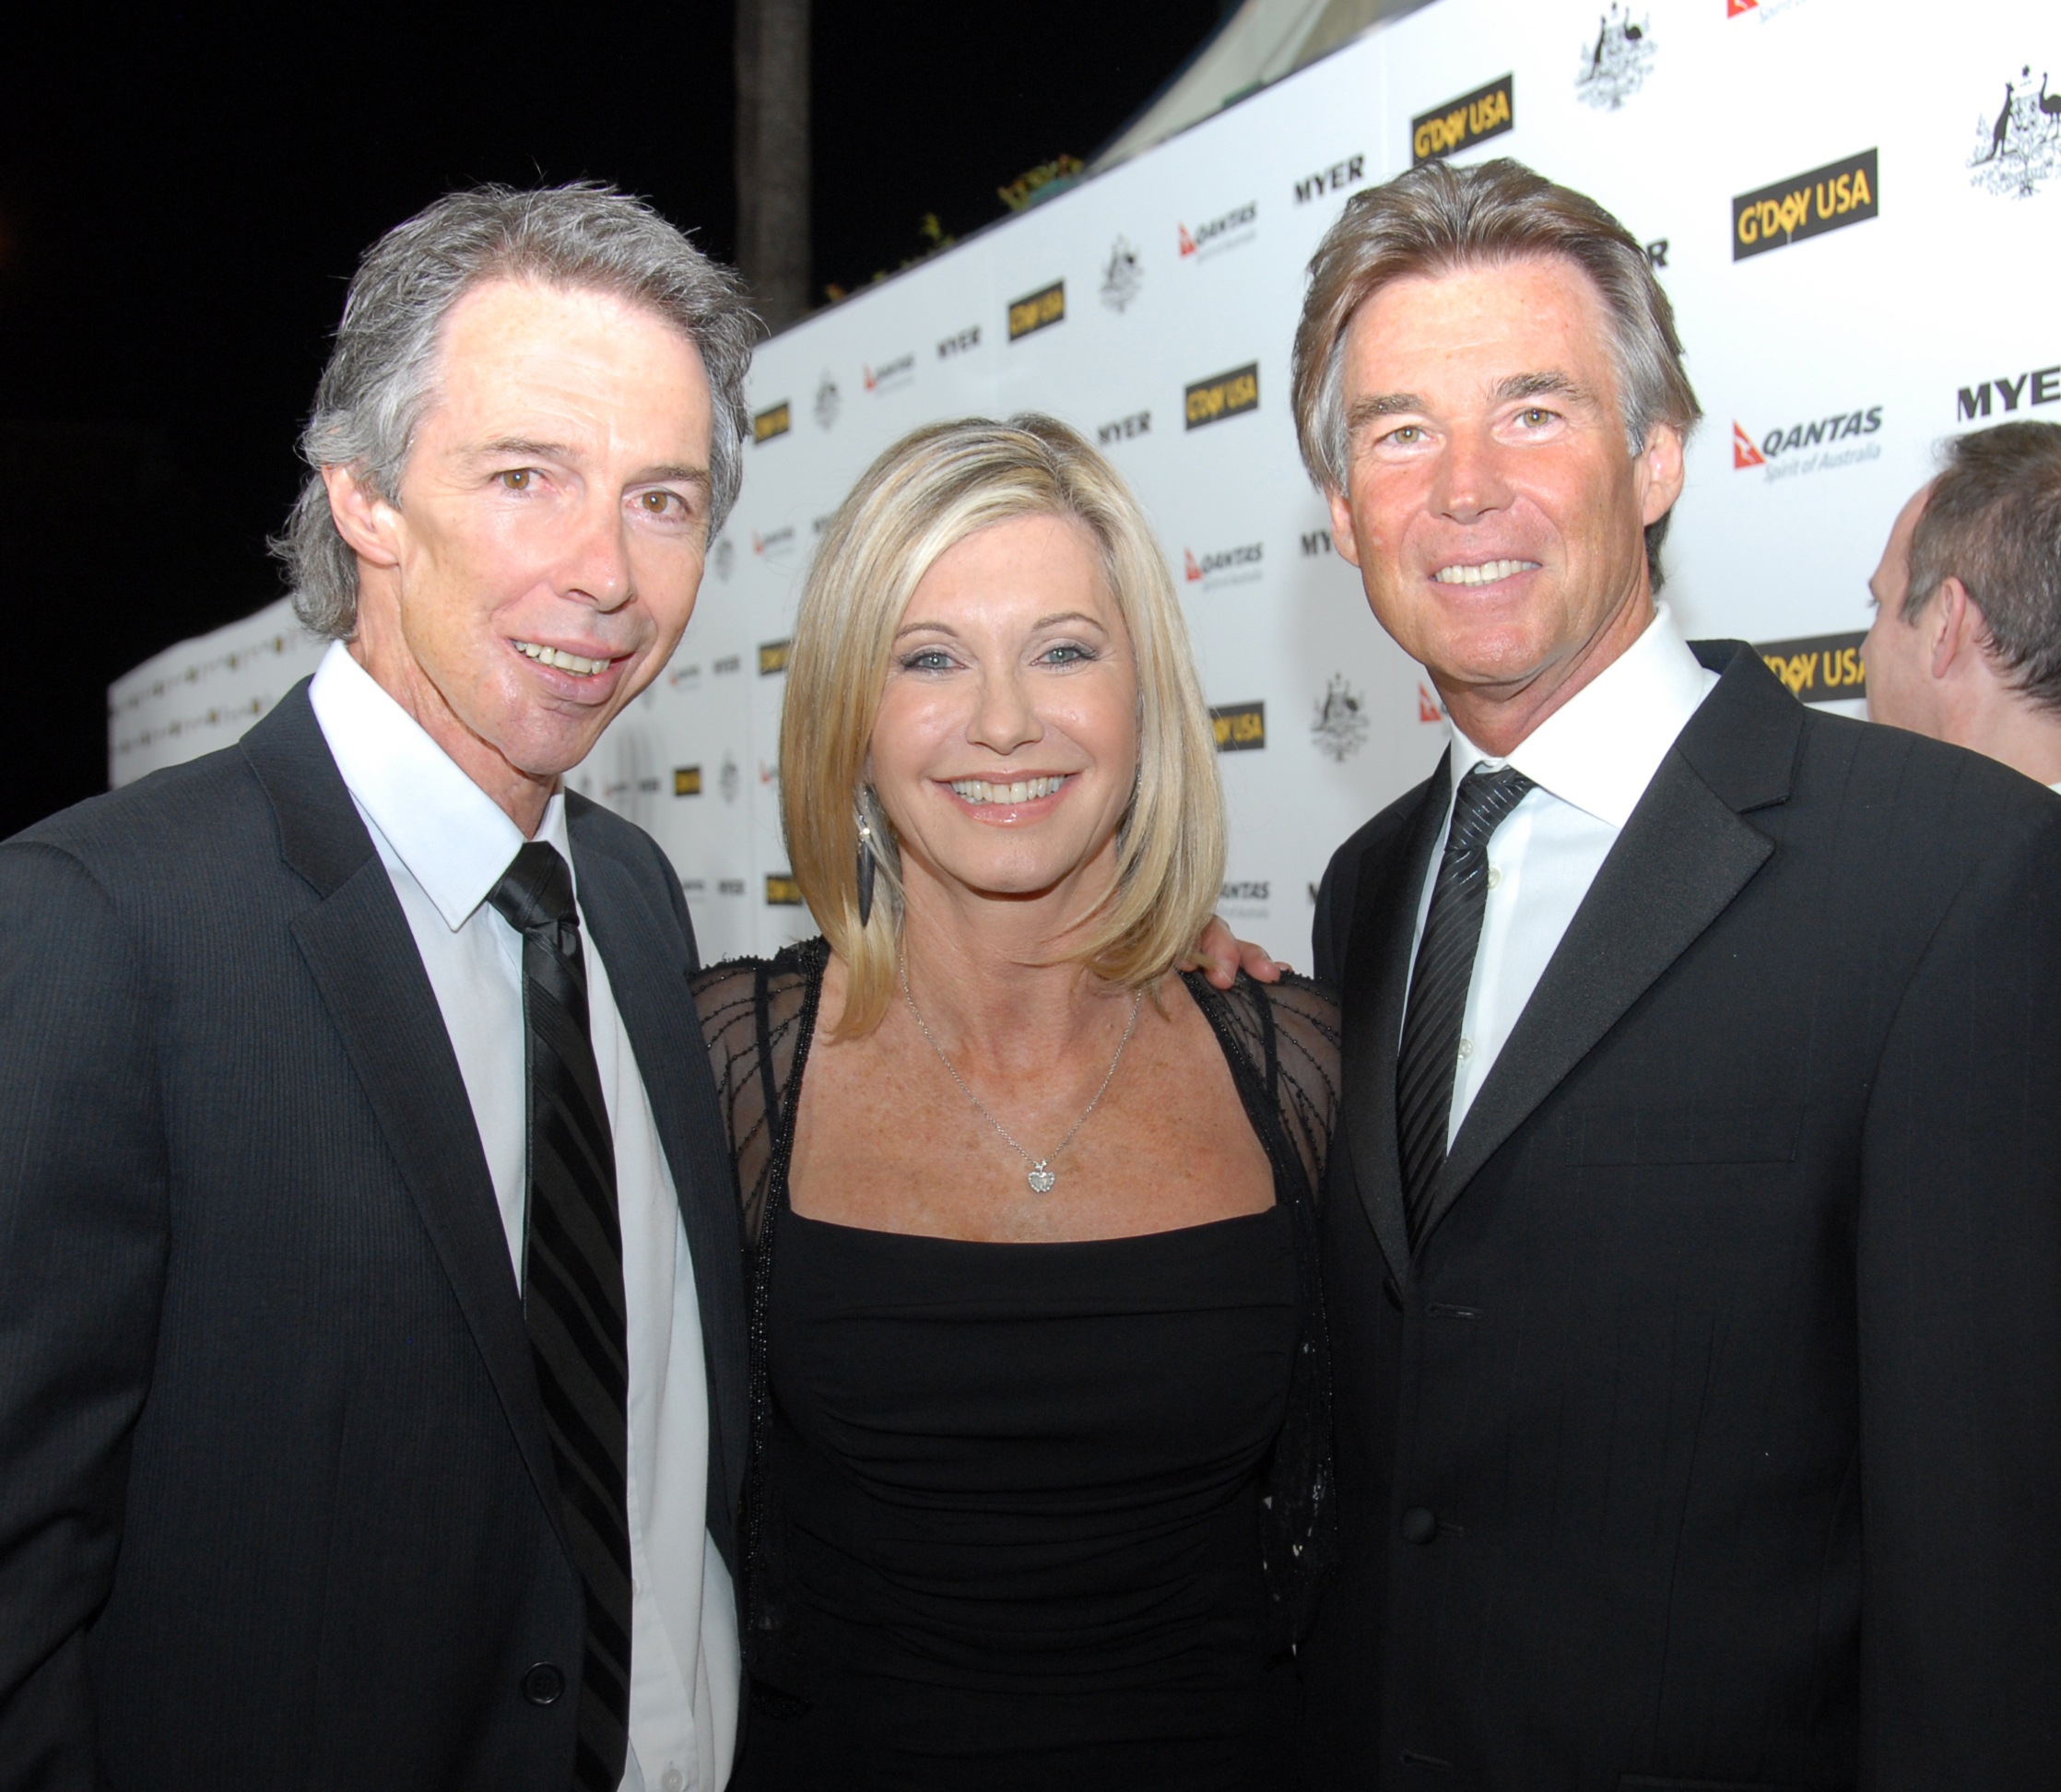 Fellow cancer survivors, James Houston Turner and Olivia Newton-John, with John Easterling, at the G'day USA black tie gala, Hollywood, California.